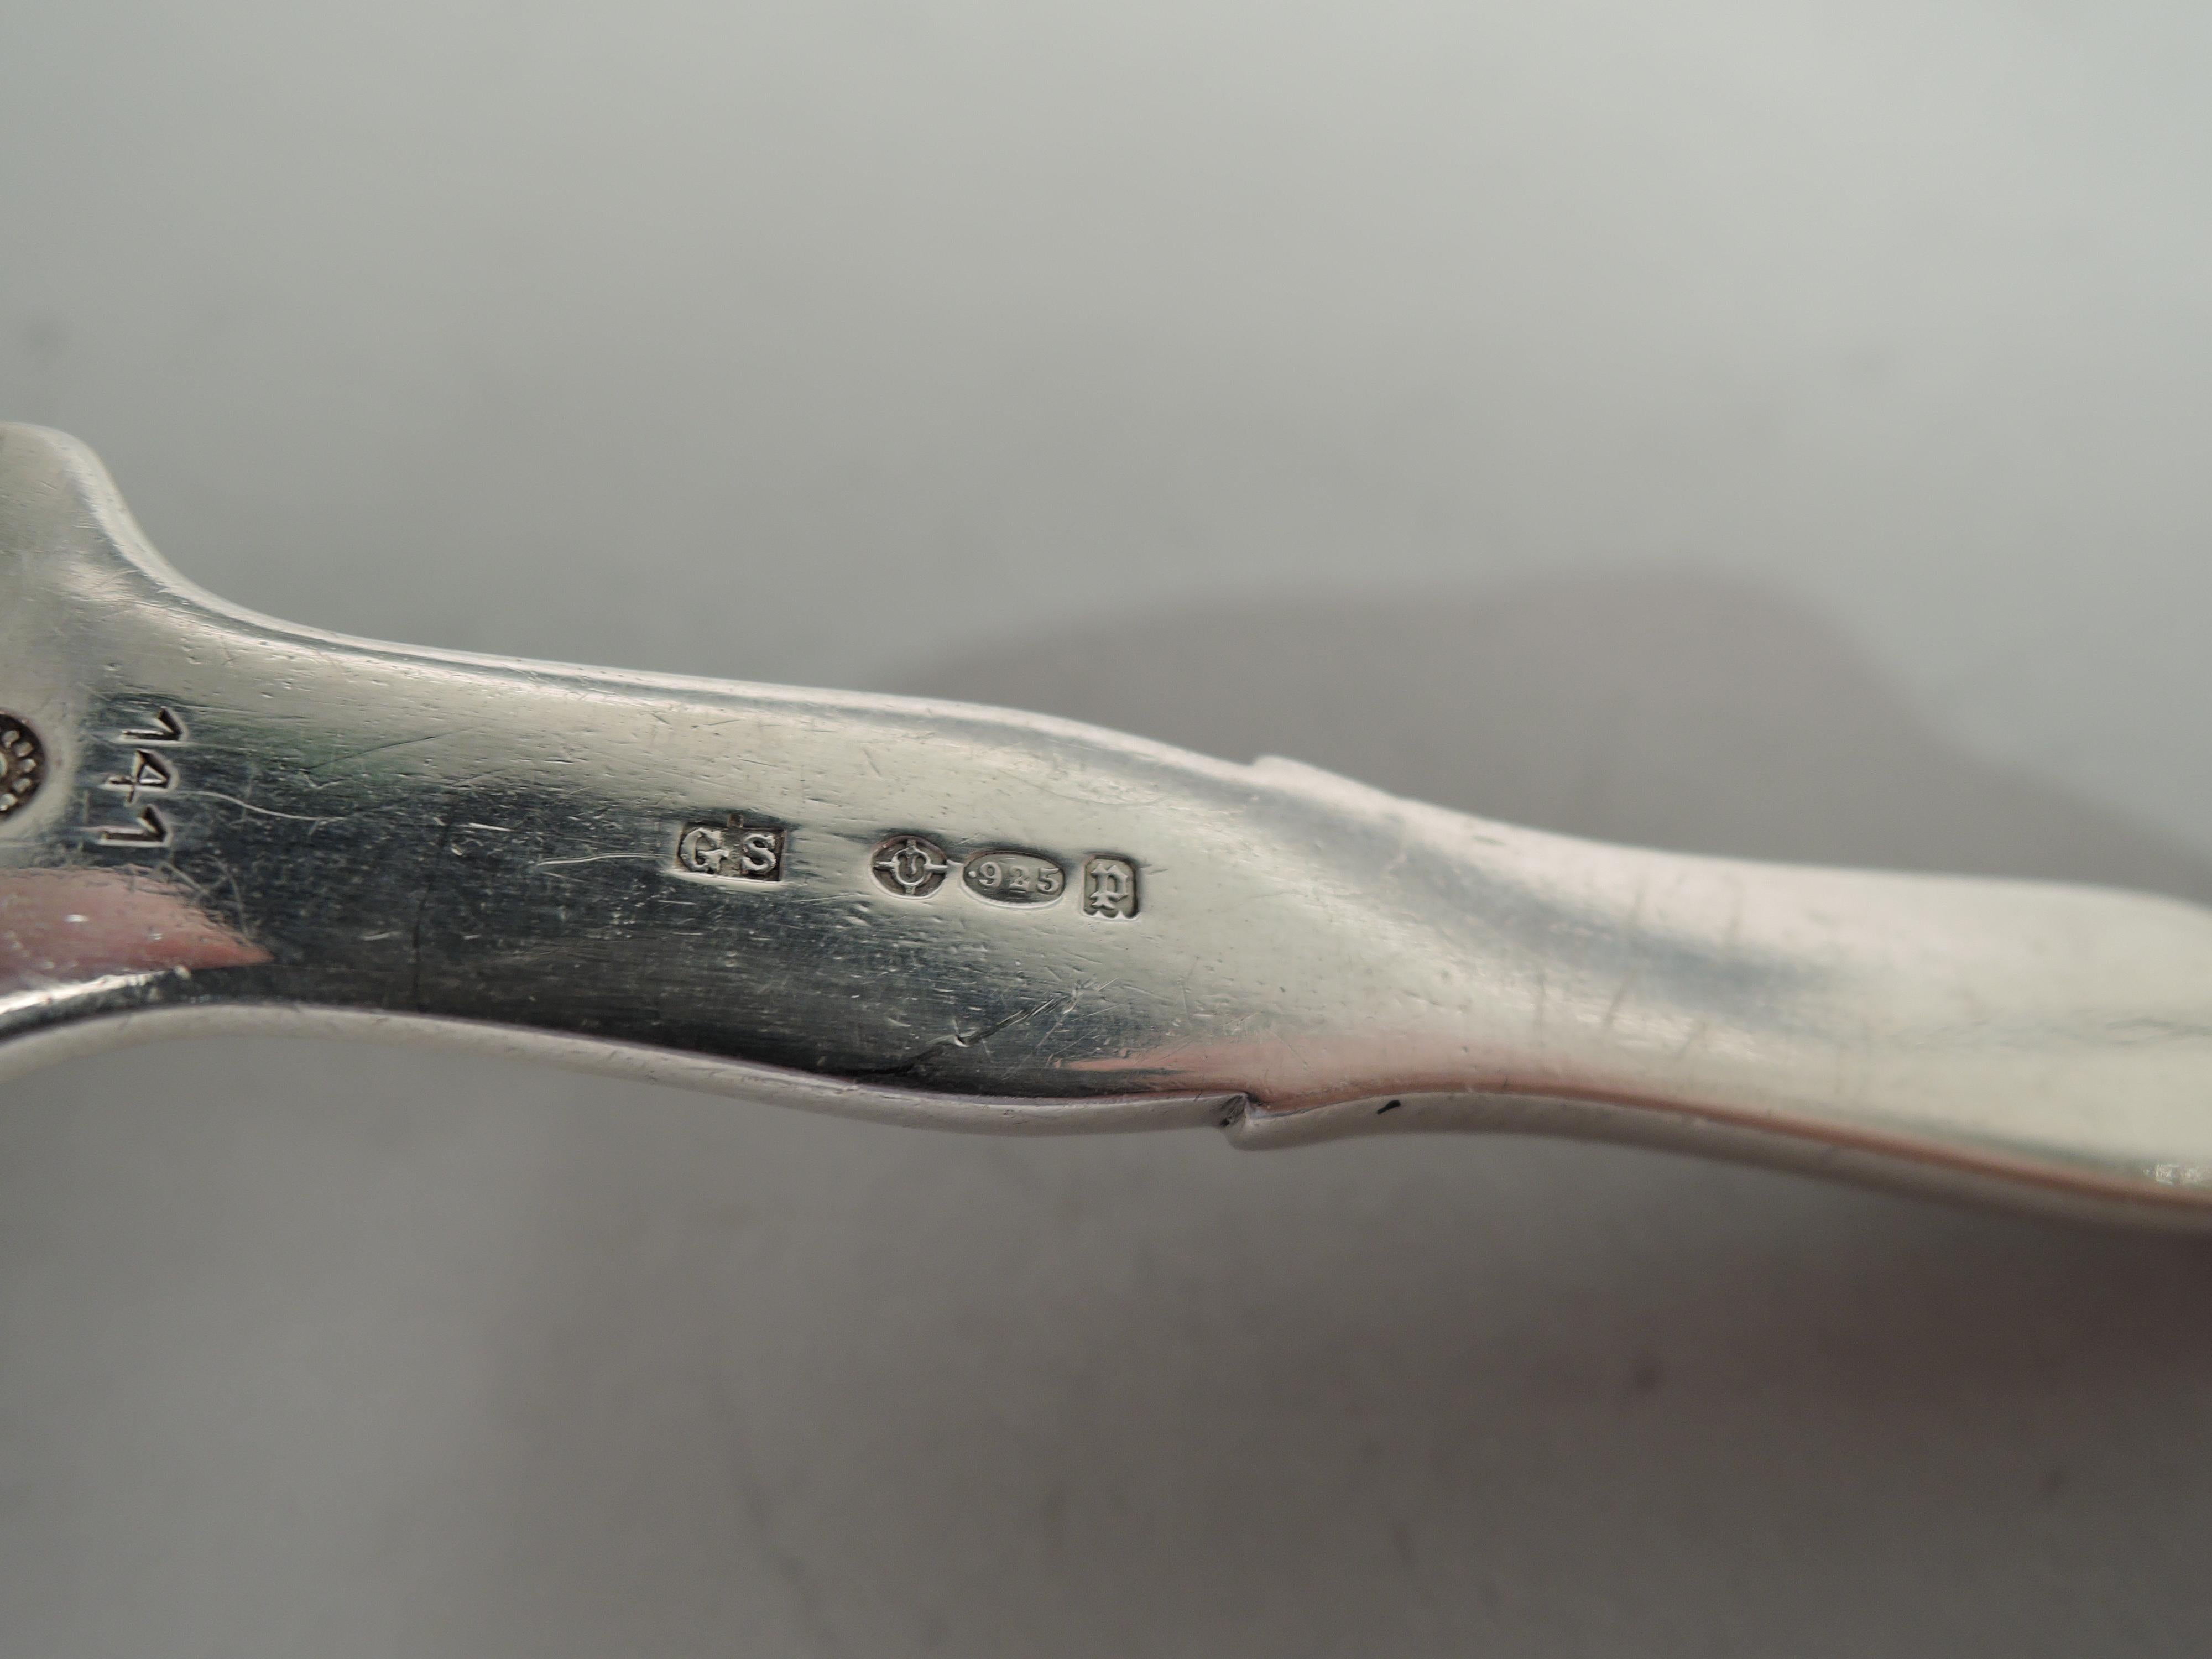 Danish Early Georg Jensen Serving Fork with English Import Marks